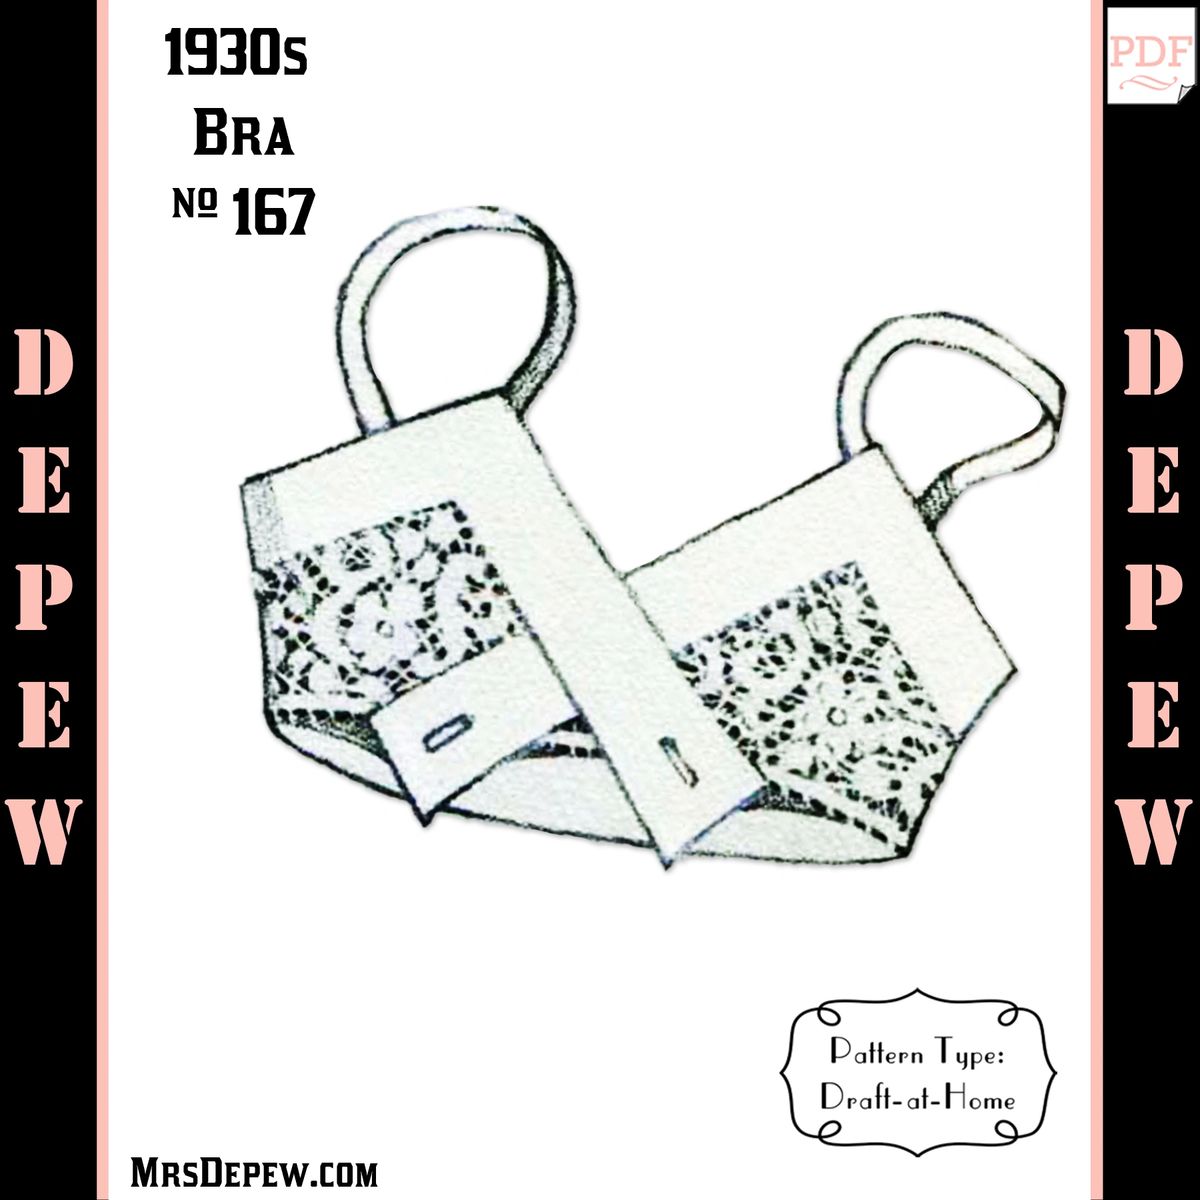 D-A-H Vintage Sewing Pattern 1930s French Bra With Lace Inset in